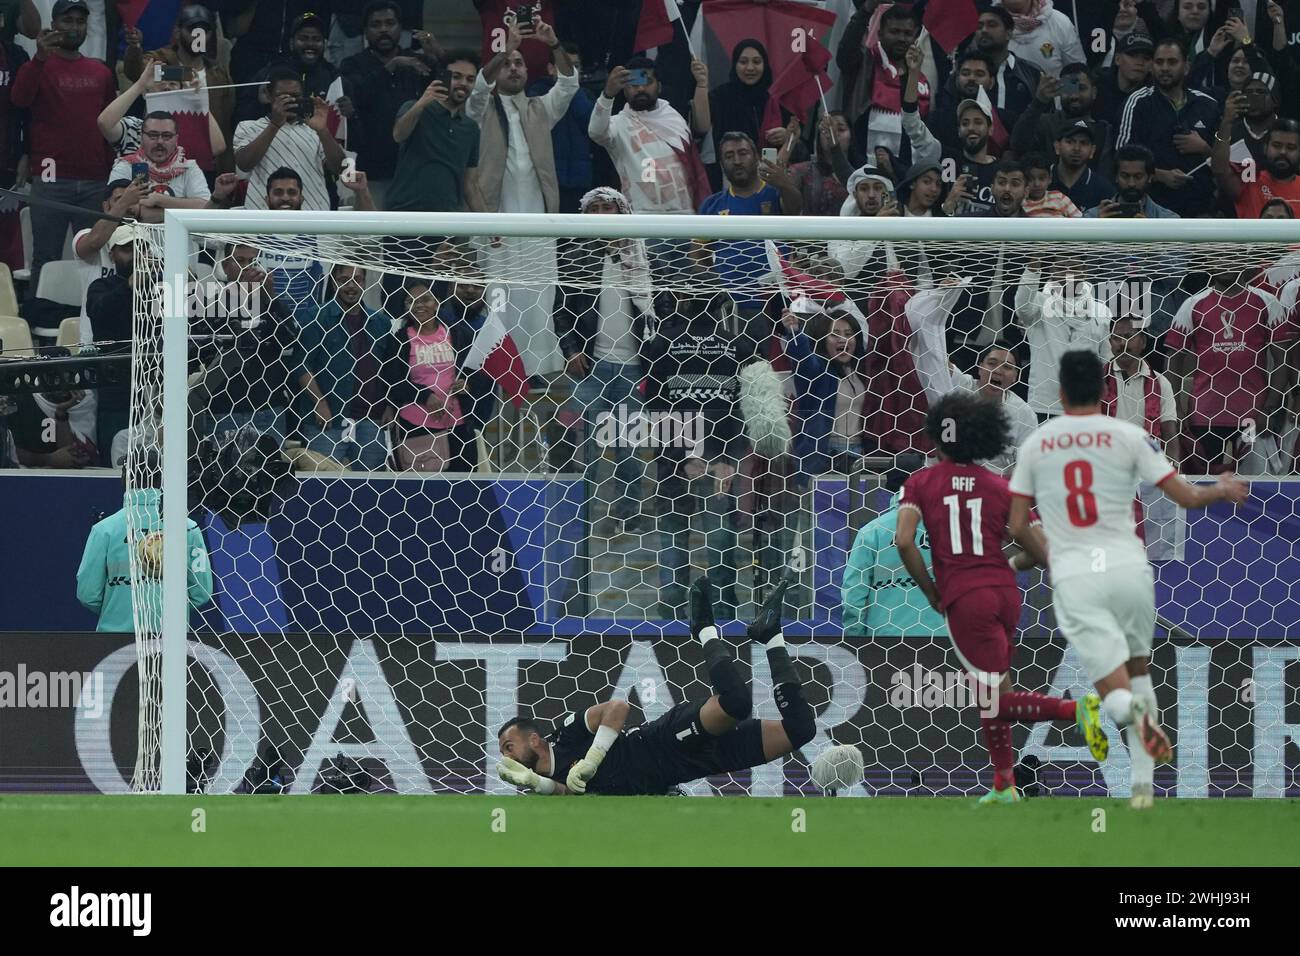 Qatar, Lusail, 10 February 2024 - Akram Afif of Qatar scoring a goal during the AFC Asia Cup Final match between Jordan and Qatar at Lusail Stadium in Lusail, Qatar on 10 February 2024. Credit: Sebo47/Alamy Live News Stock Photo